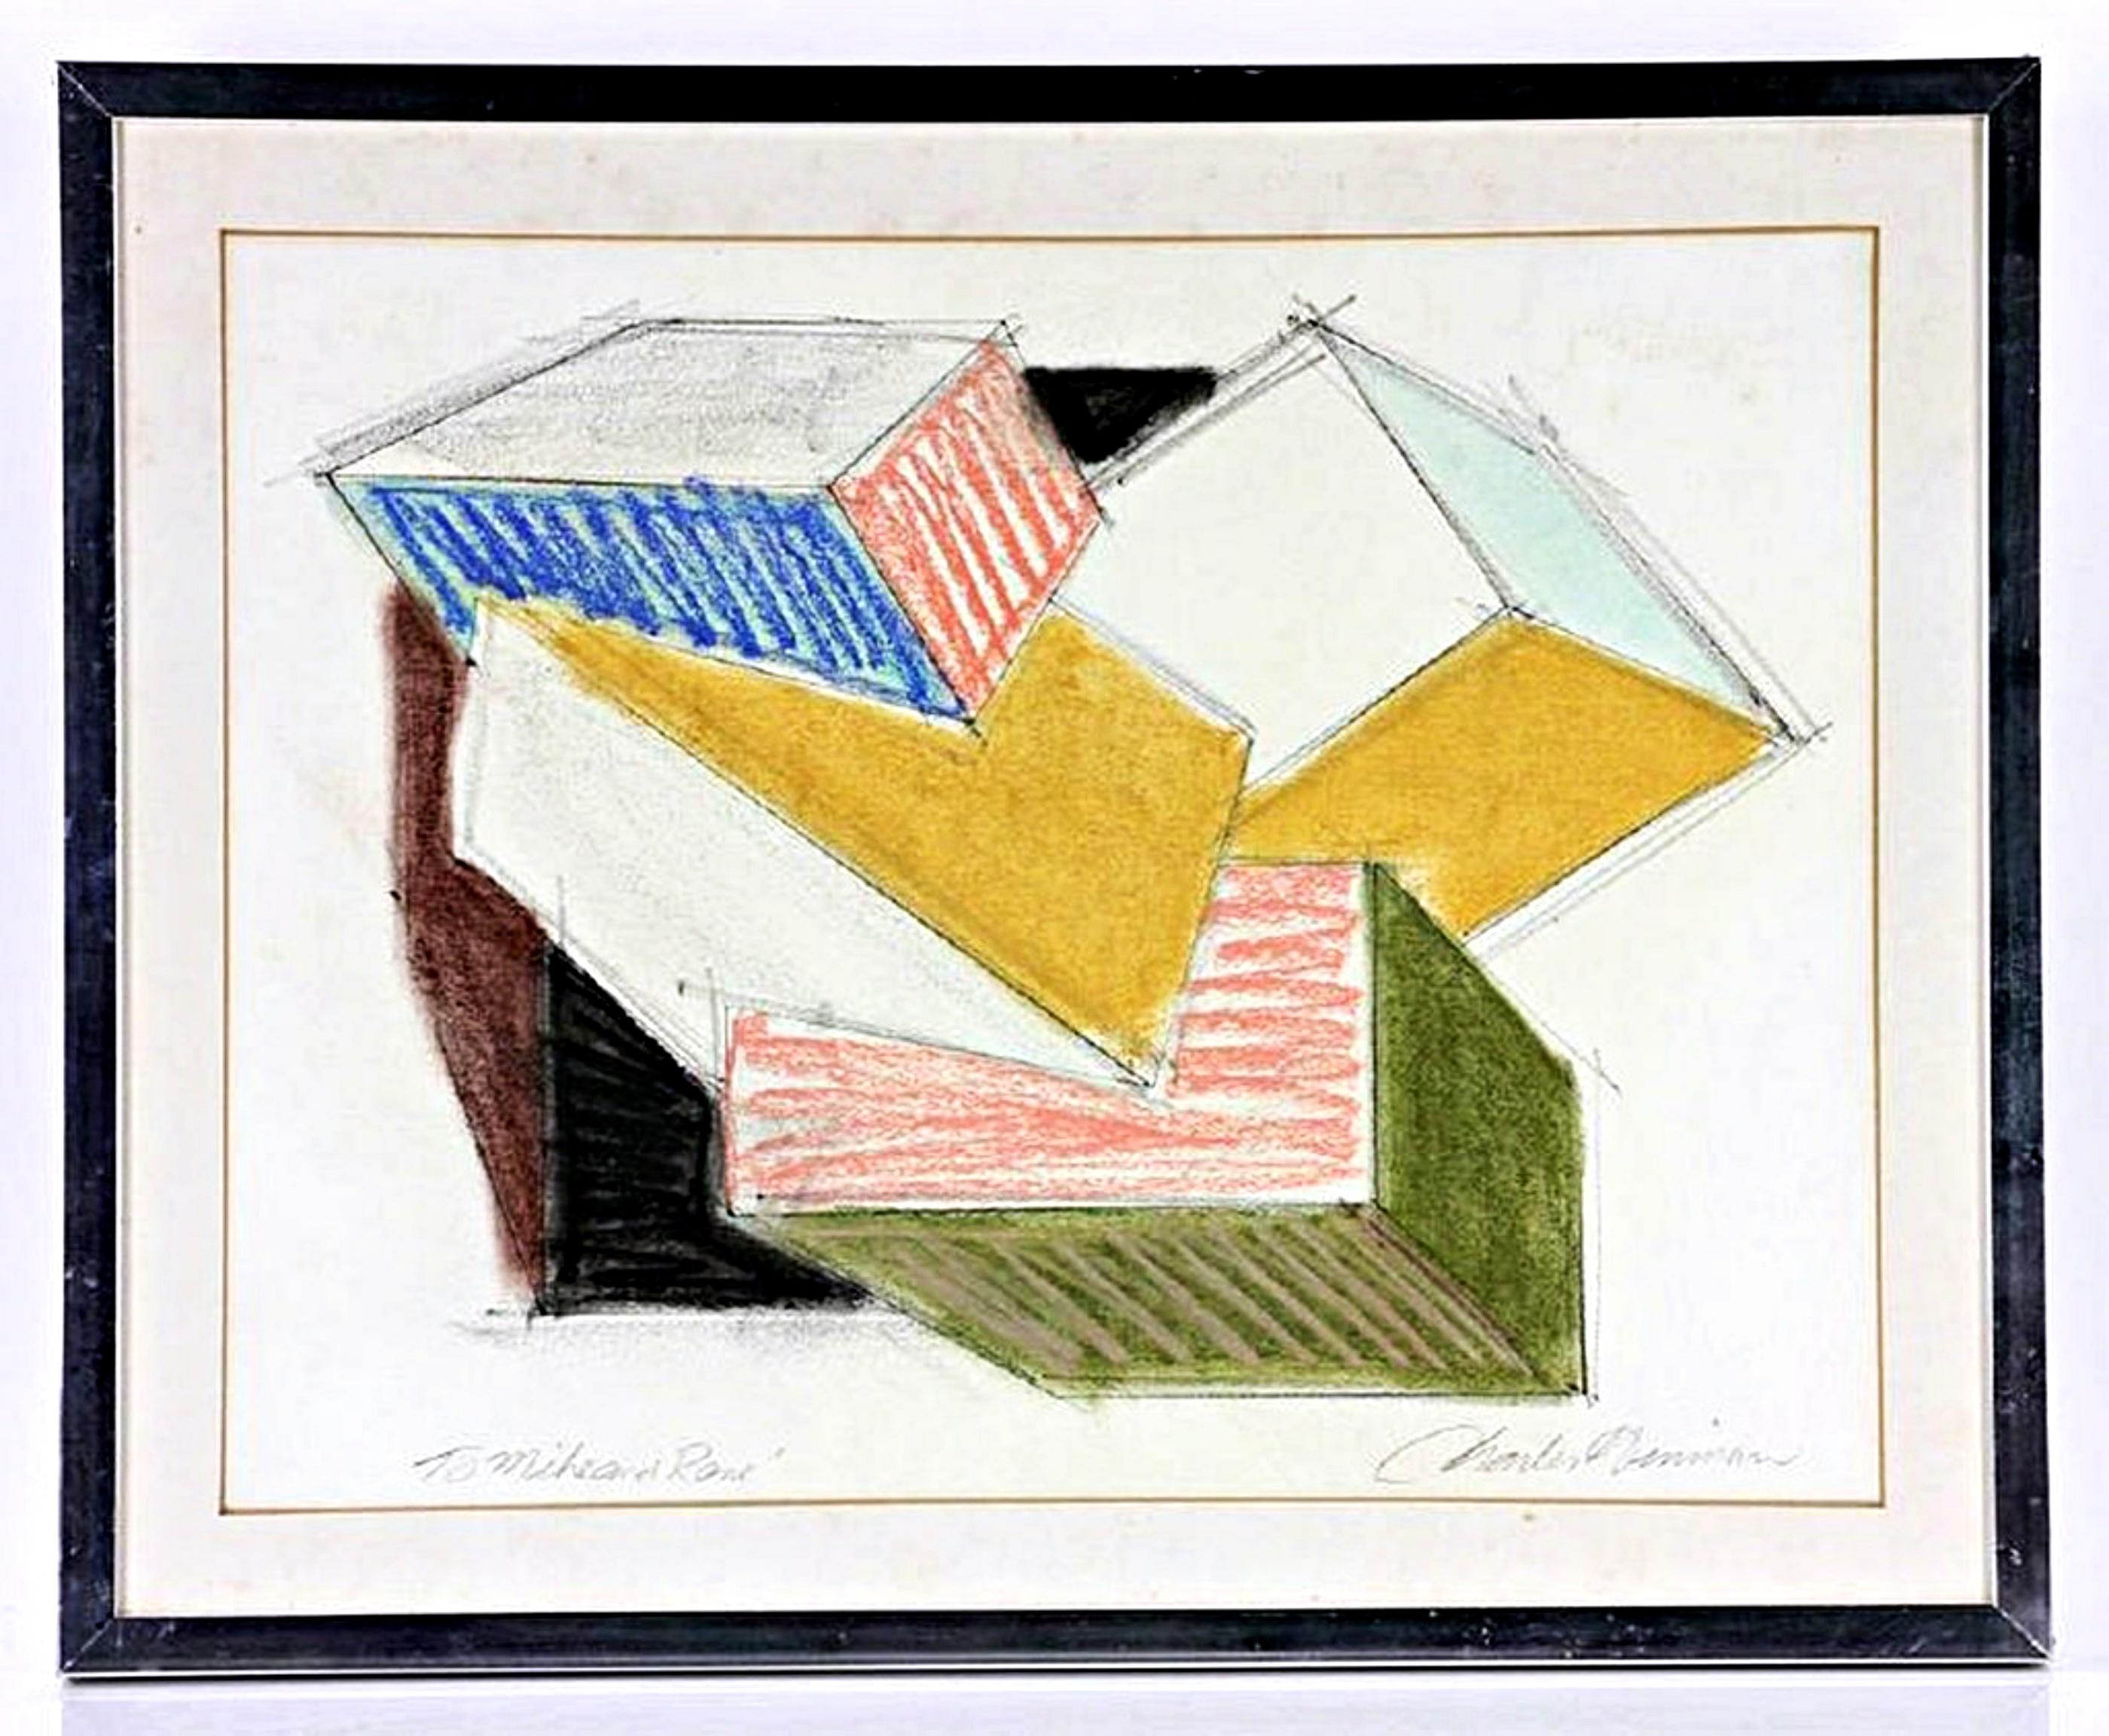 Charles Hinman Abstract Drawing - Untitled Geometric Abstraction - Minimalist composition